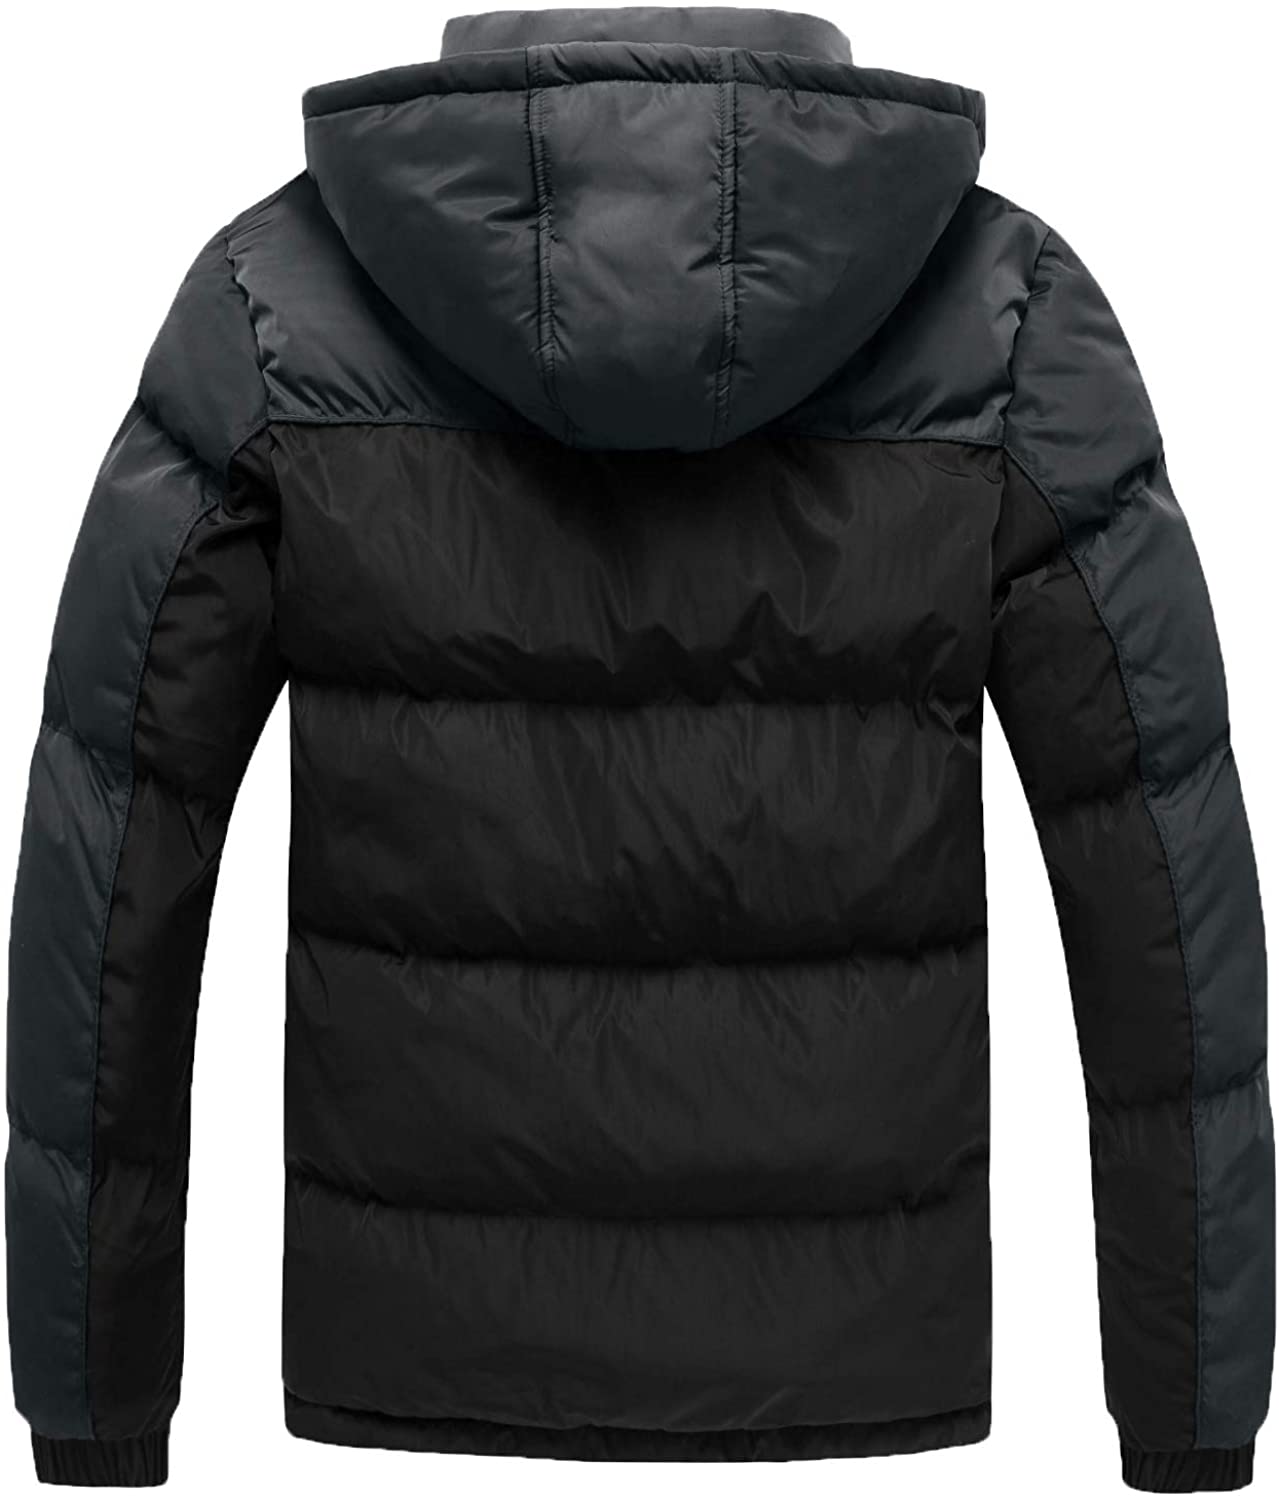 Wantdo Men's Warm Puffer Jacket Thicken Padded Winter Coat with ...